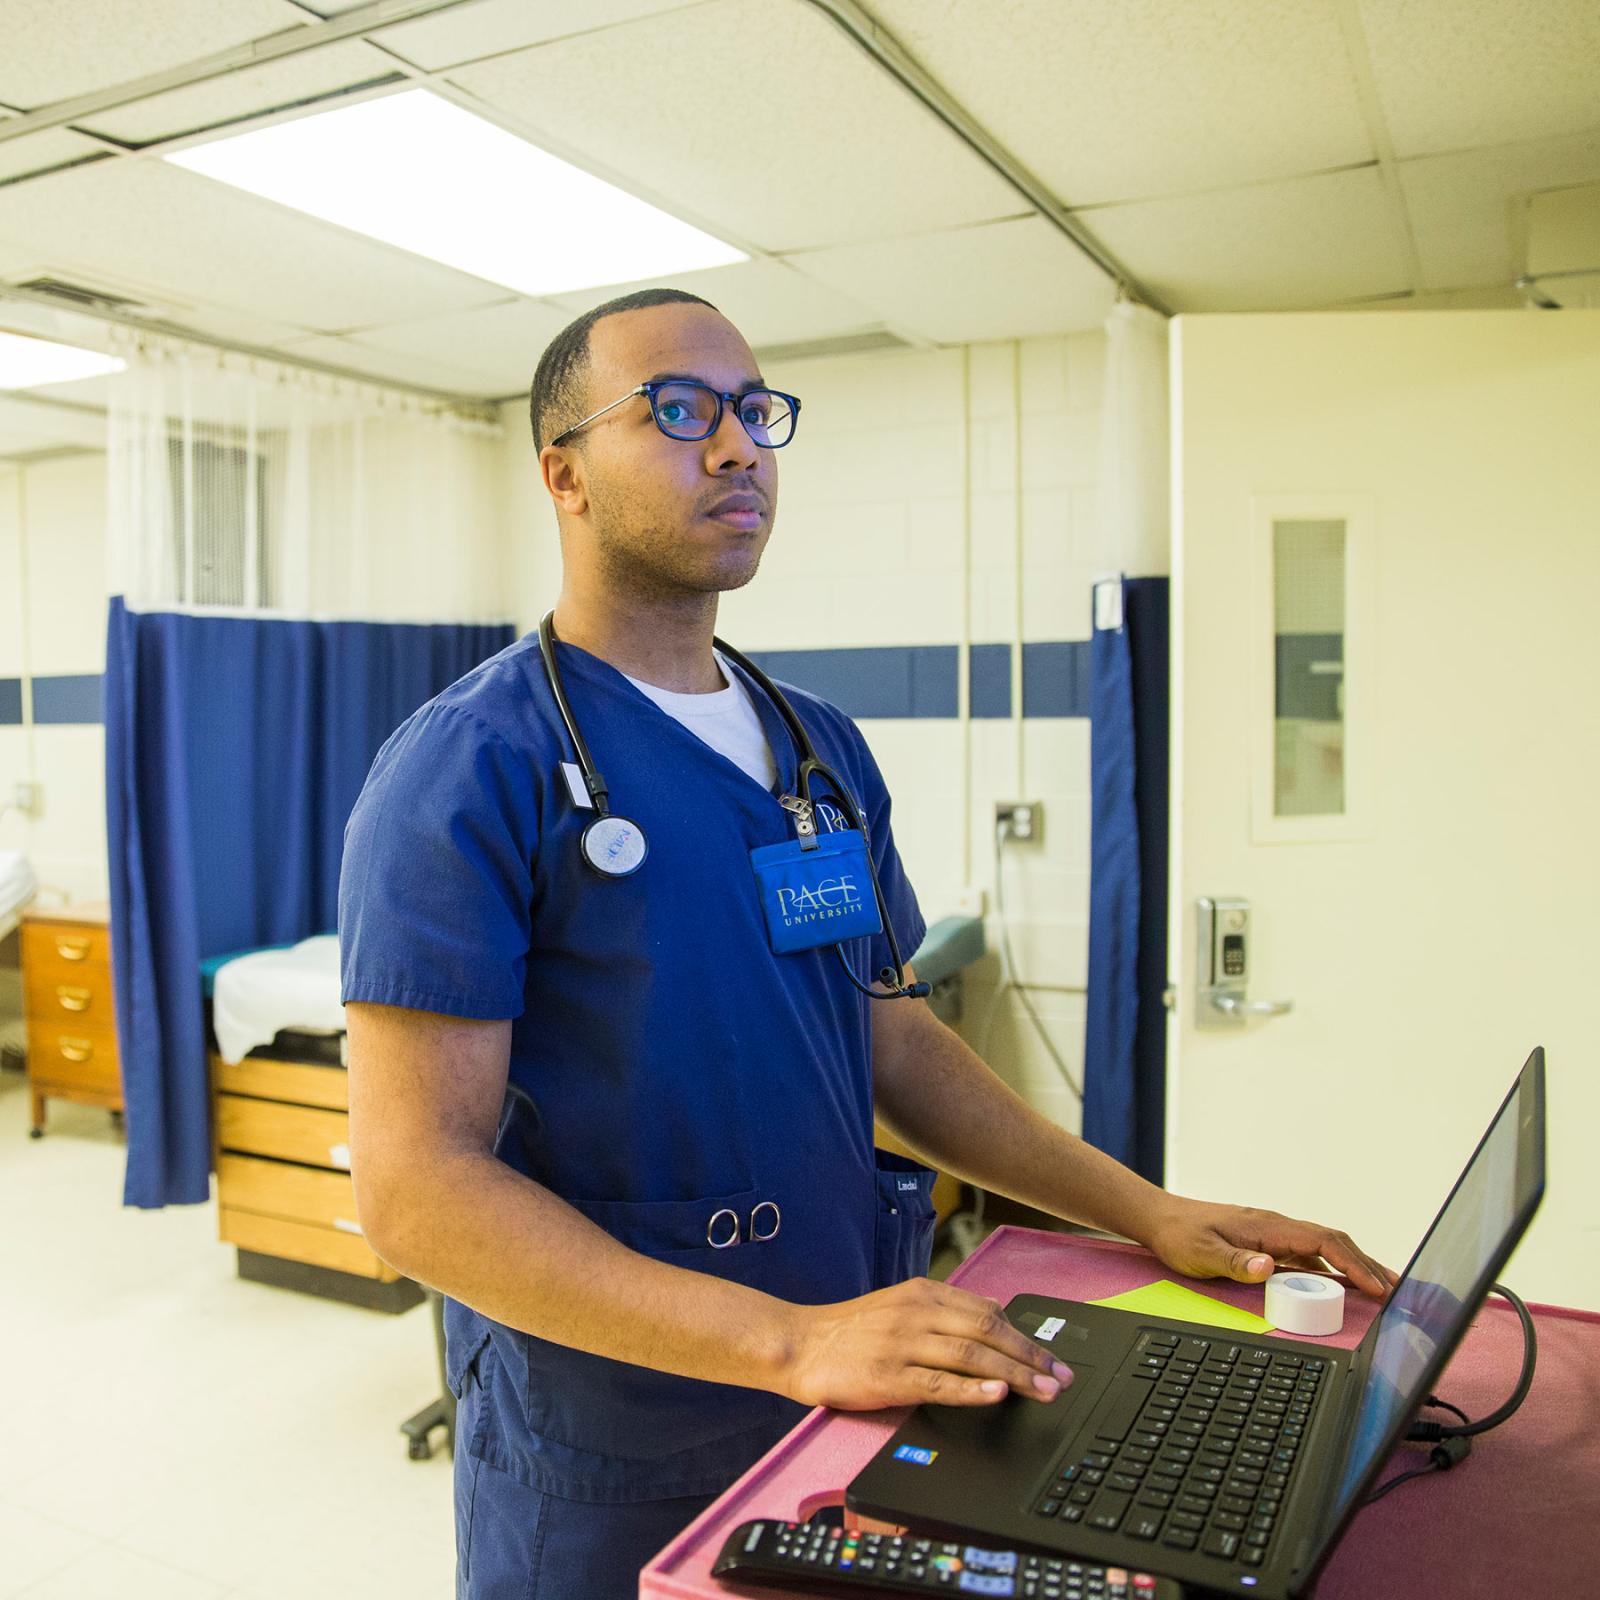 College of Health Professions student working on a computer in a clinical setting.